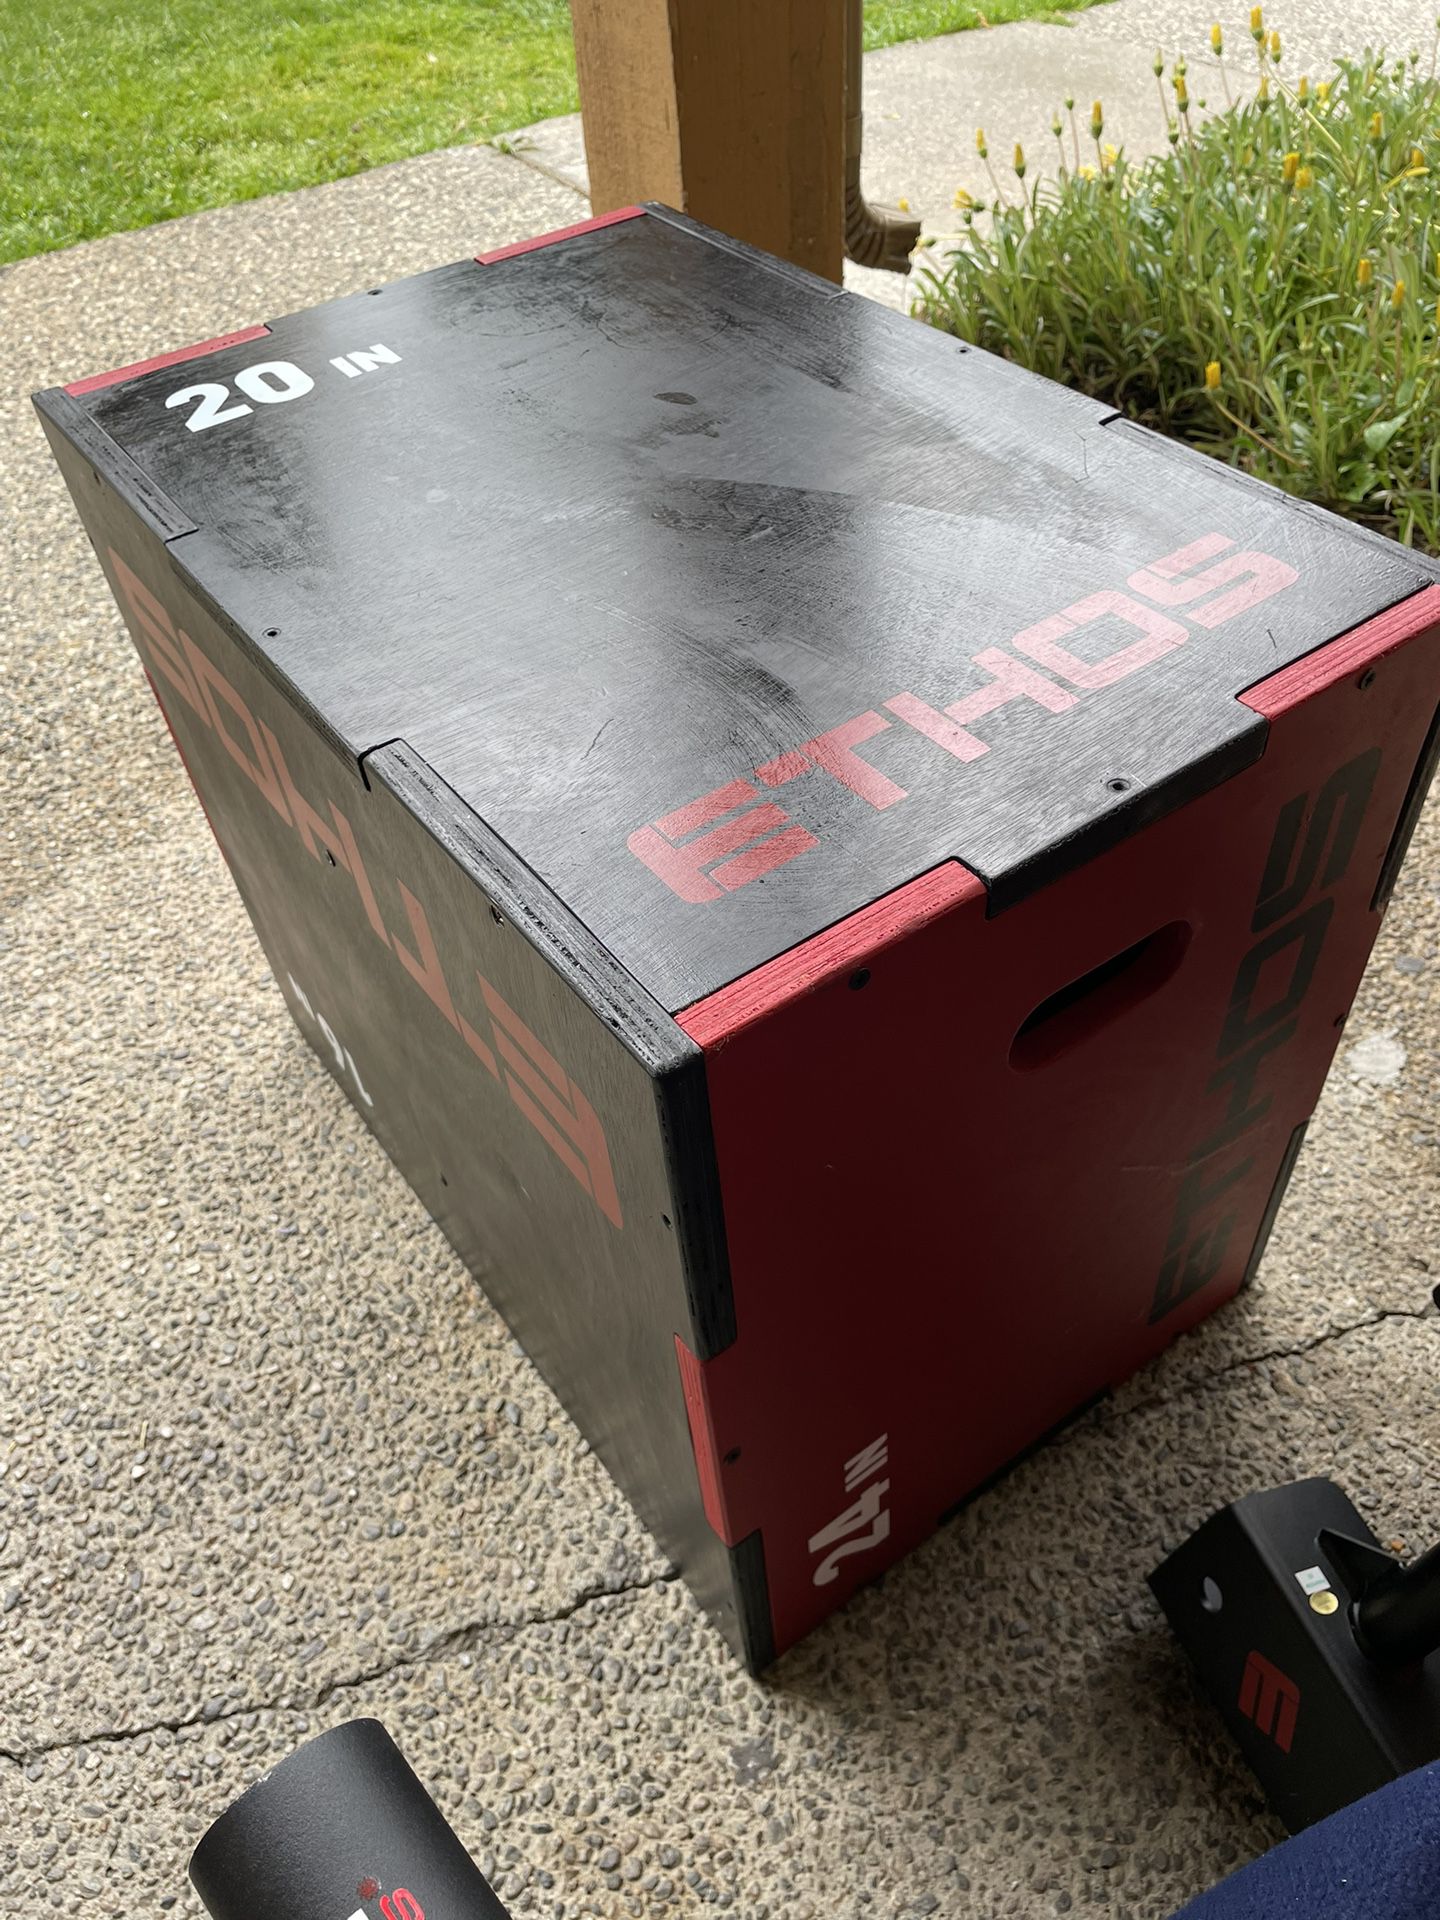 ETHOS 3 In-1 Jump Box For At Home Weights Gym 